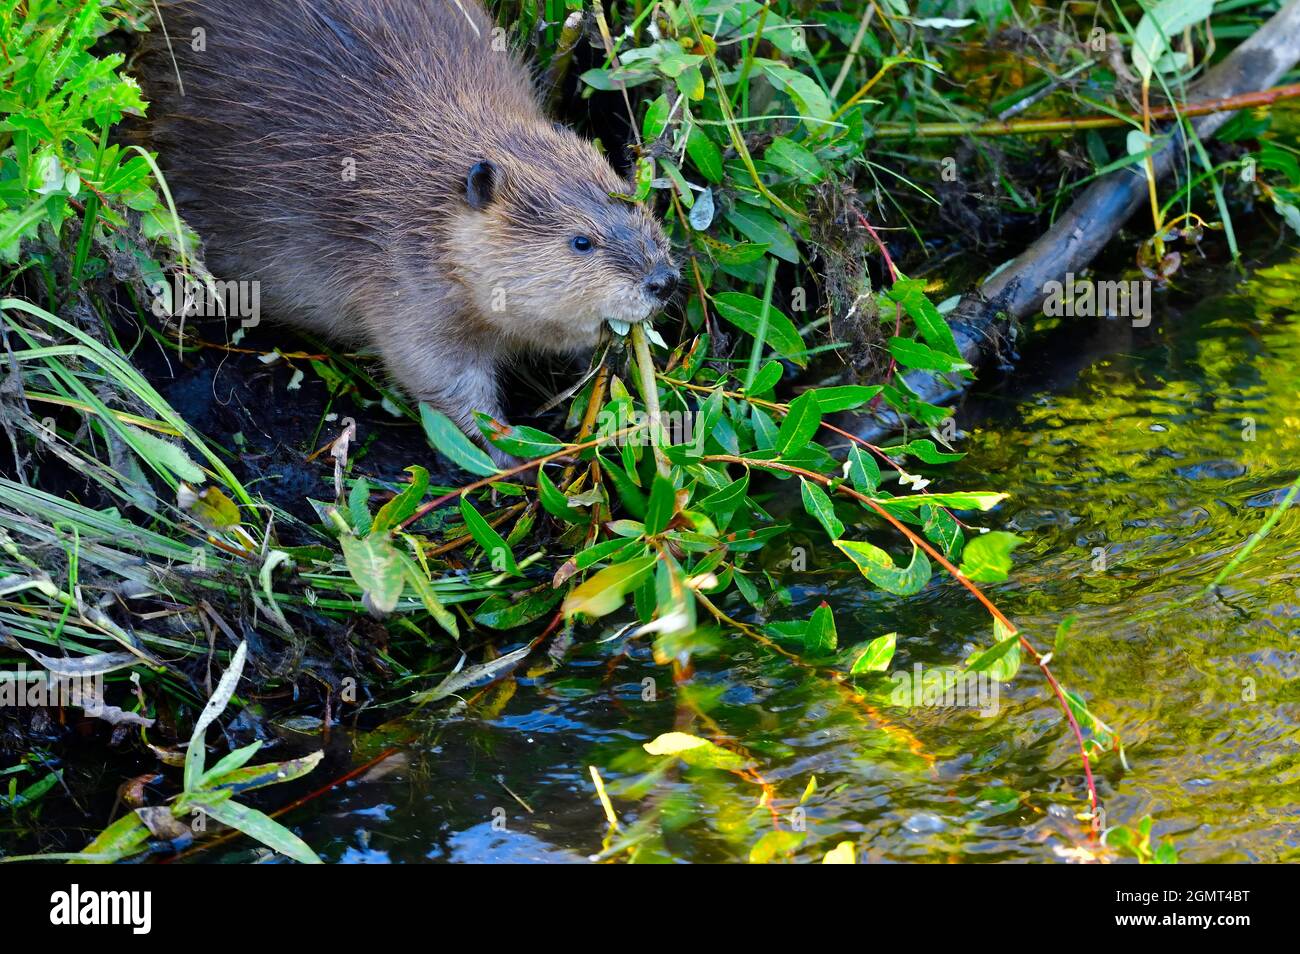 A baby beaver 'Castor canadensis', feeding on some green leaves and grasses at his beaver dam home in rural Alberta Canada. Stock Photo